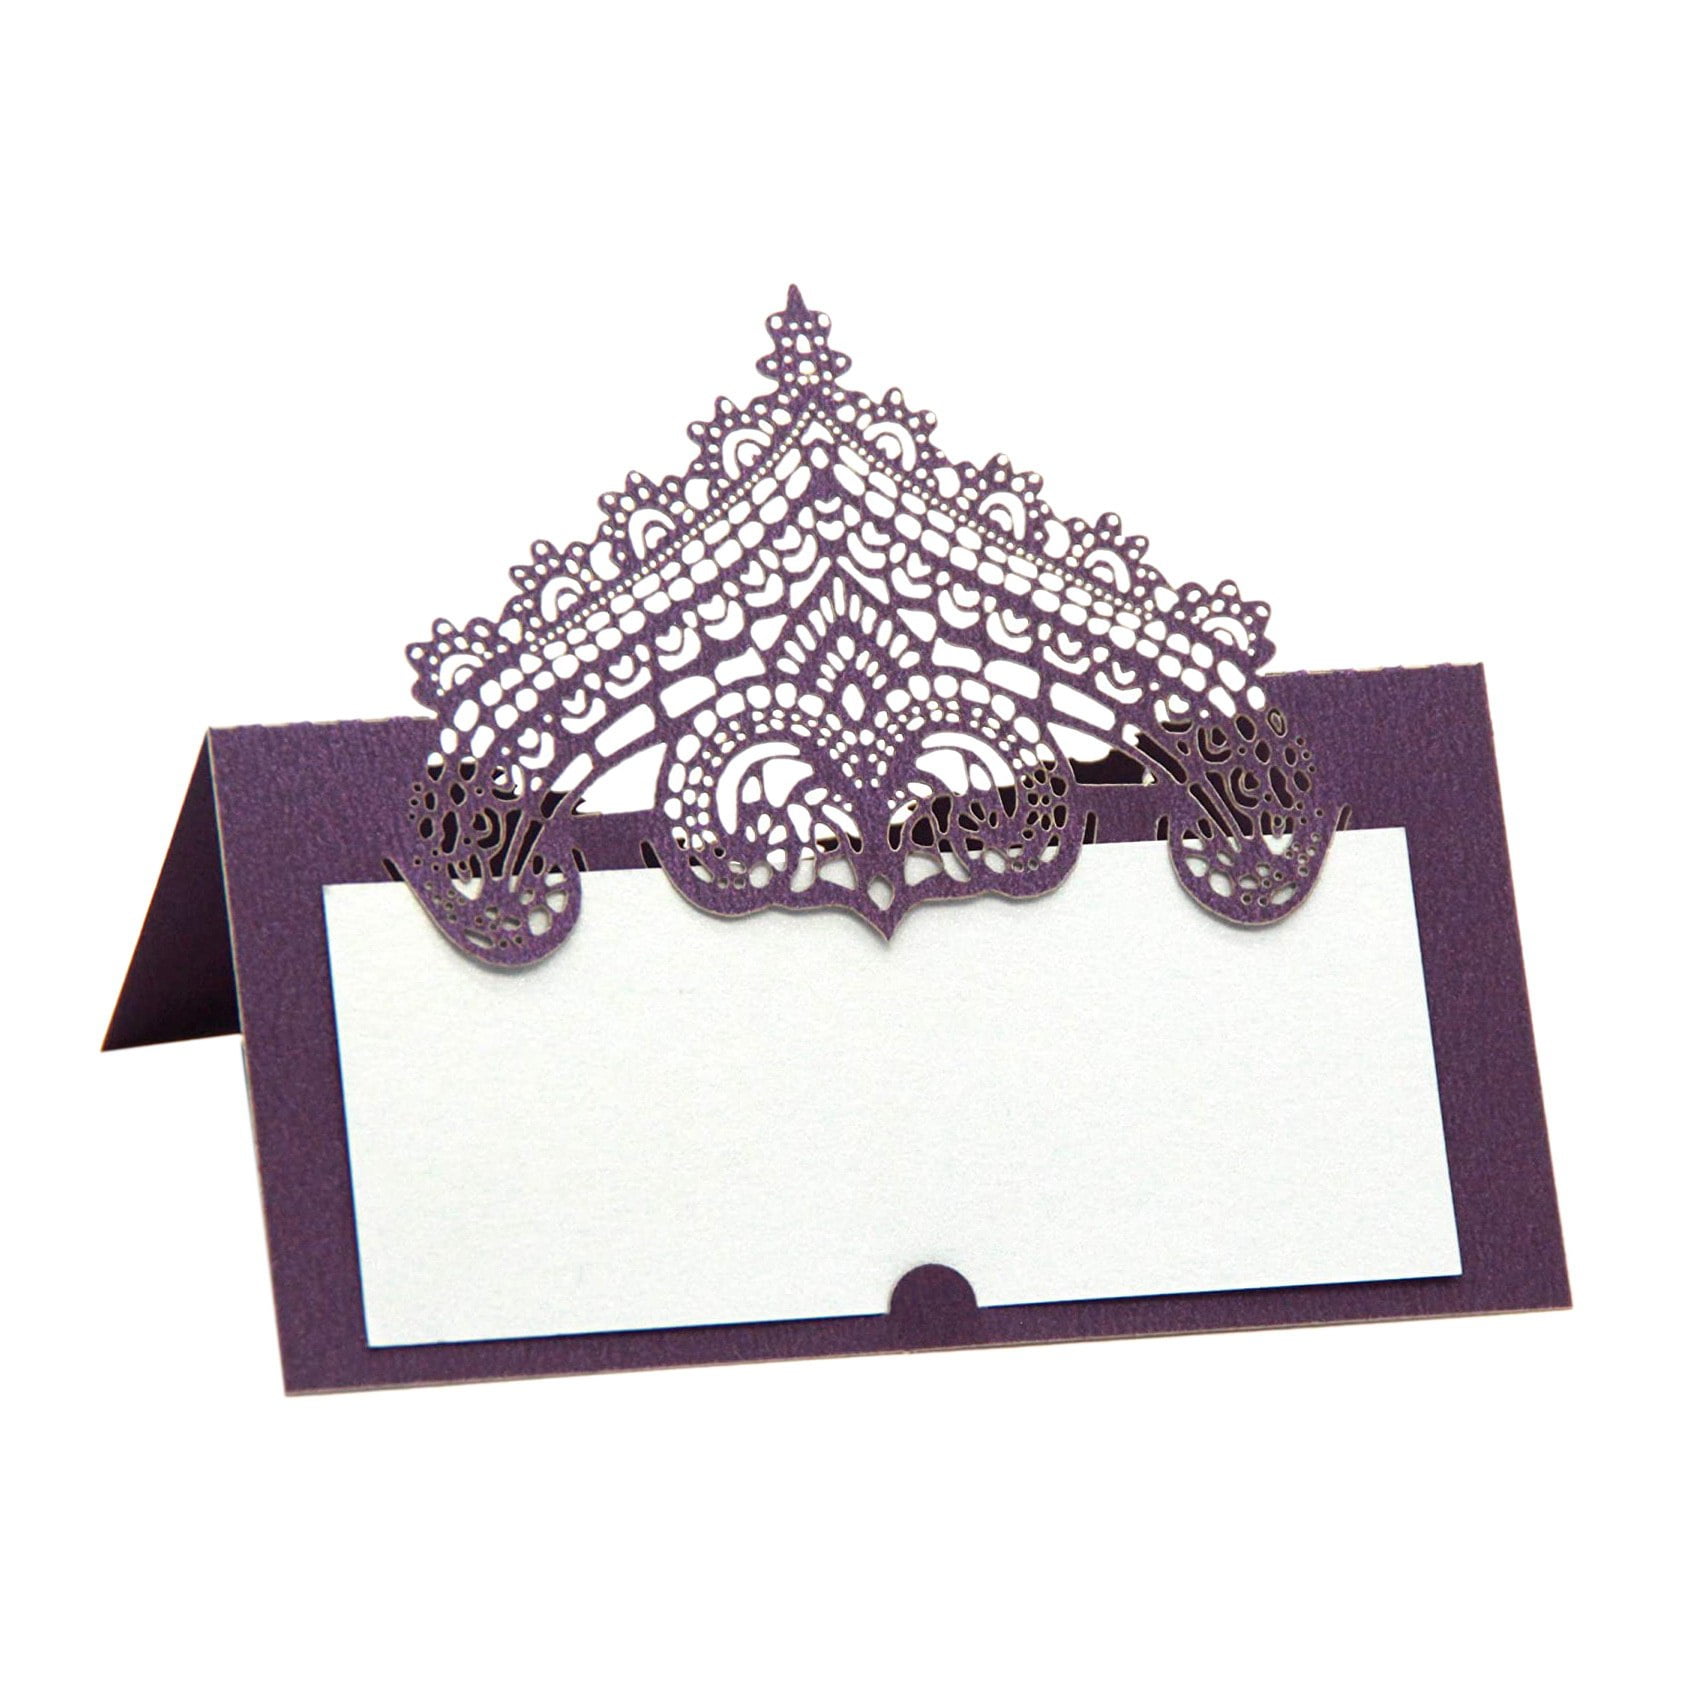 100-pcs-table-place-cards-with-white-inserts-crown-tent-cards-name-cards-for-wedding-banquets